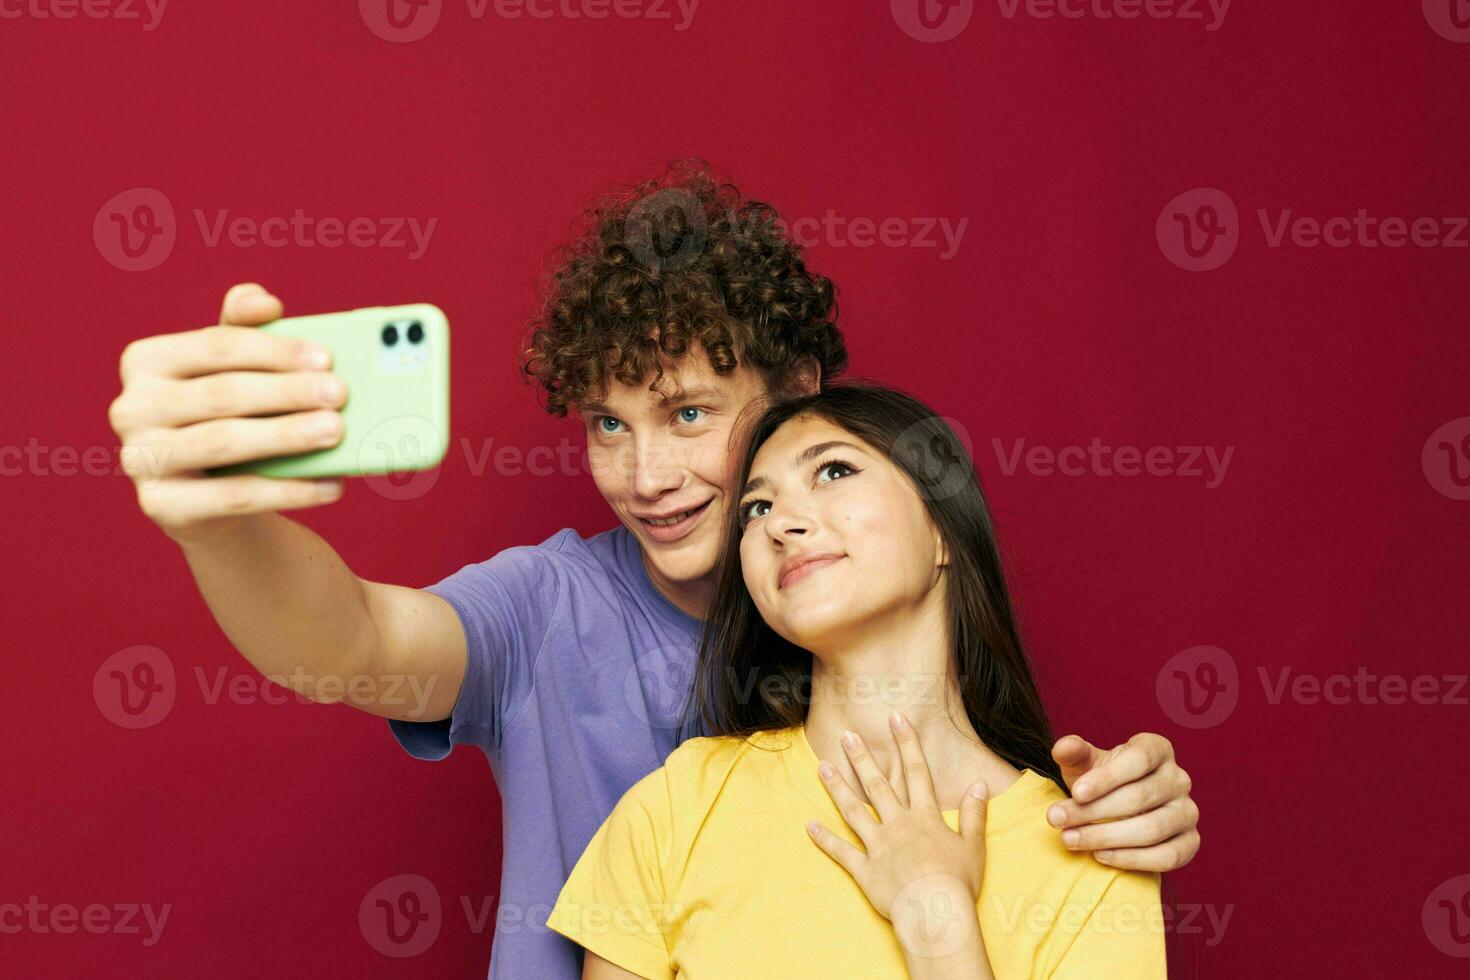 young man and girl modern style emotions fun phone Youth style photo